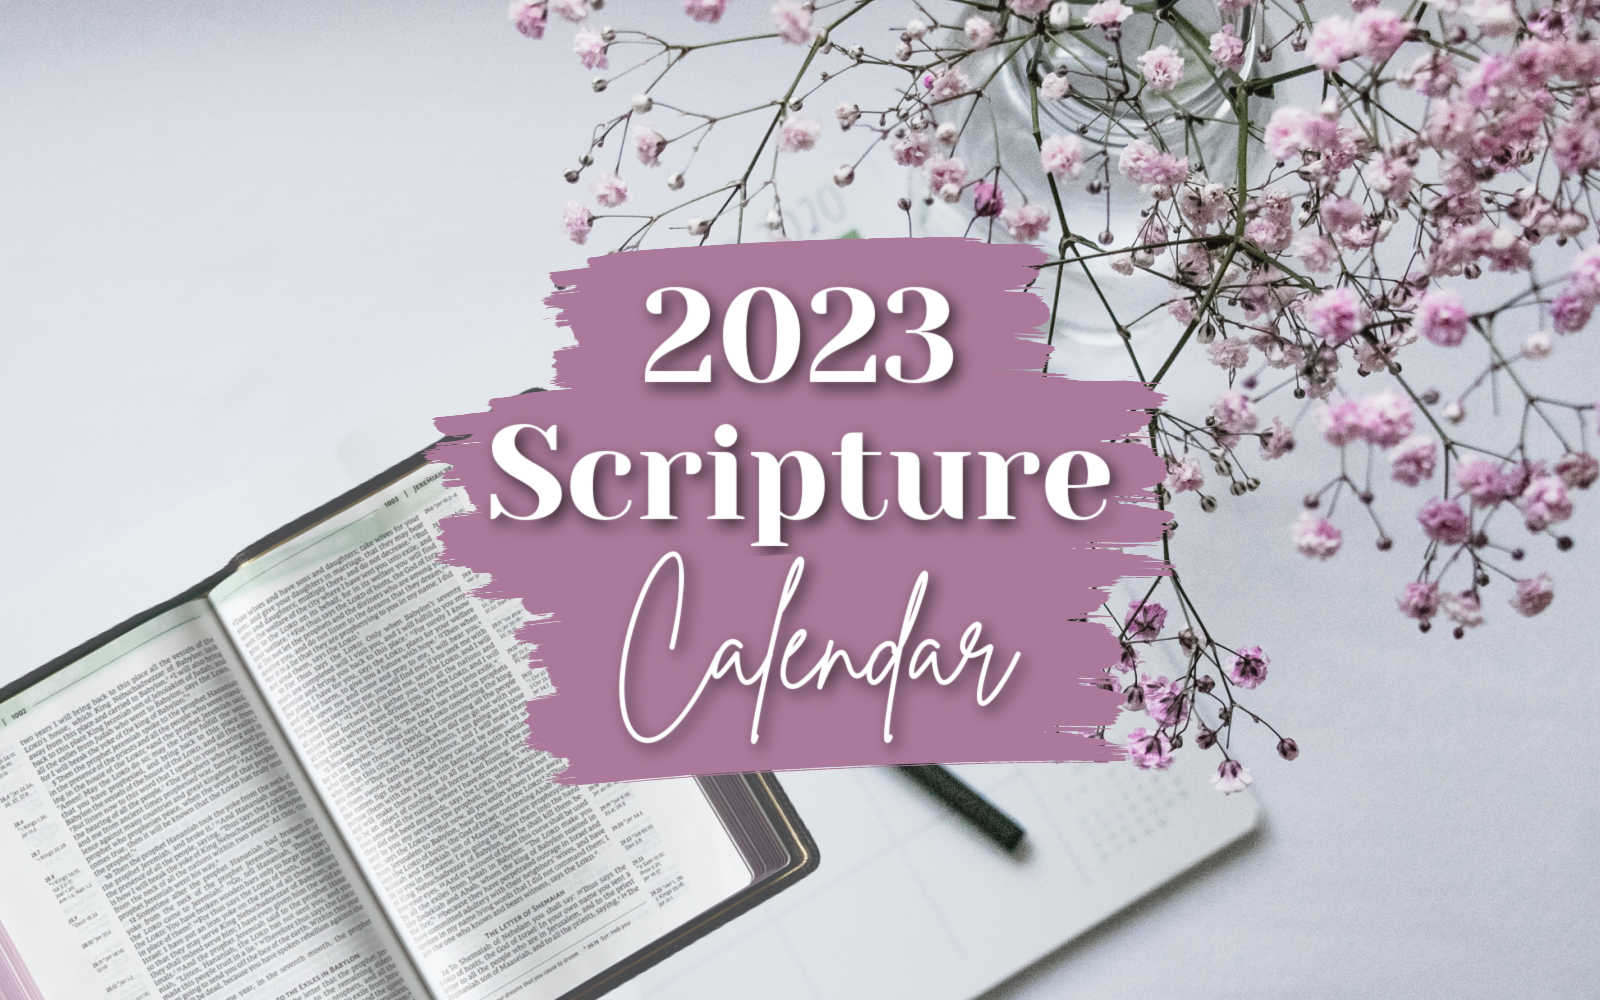 2023 Scripture calendar banner image of Bible and calendar for the Monthly Bible Verses Calendar sign up page.